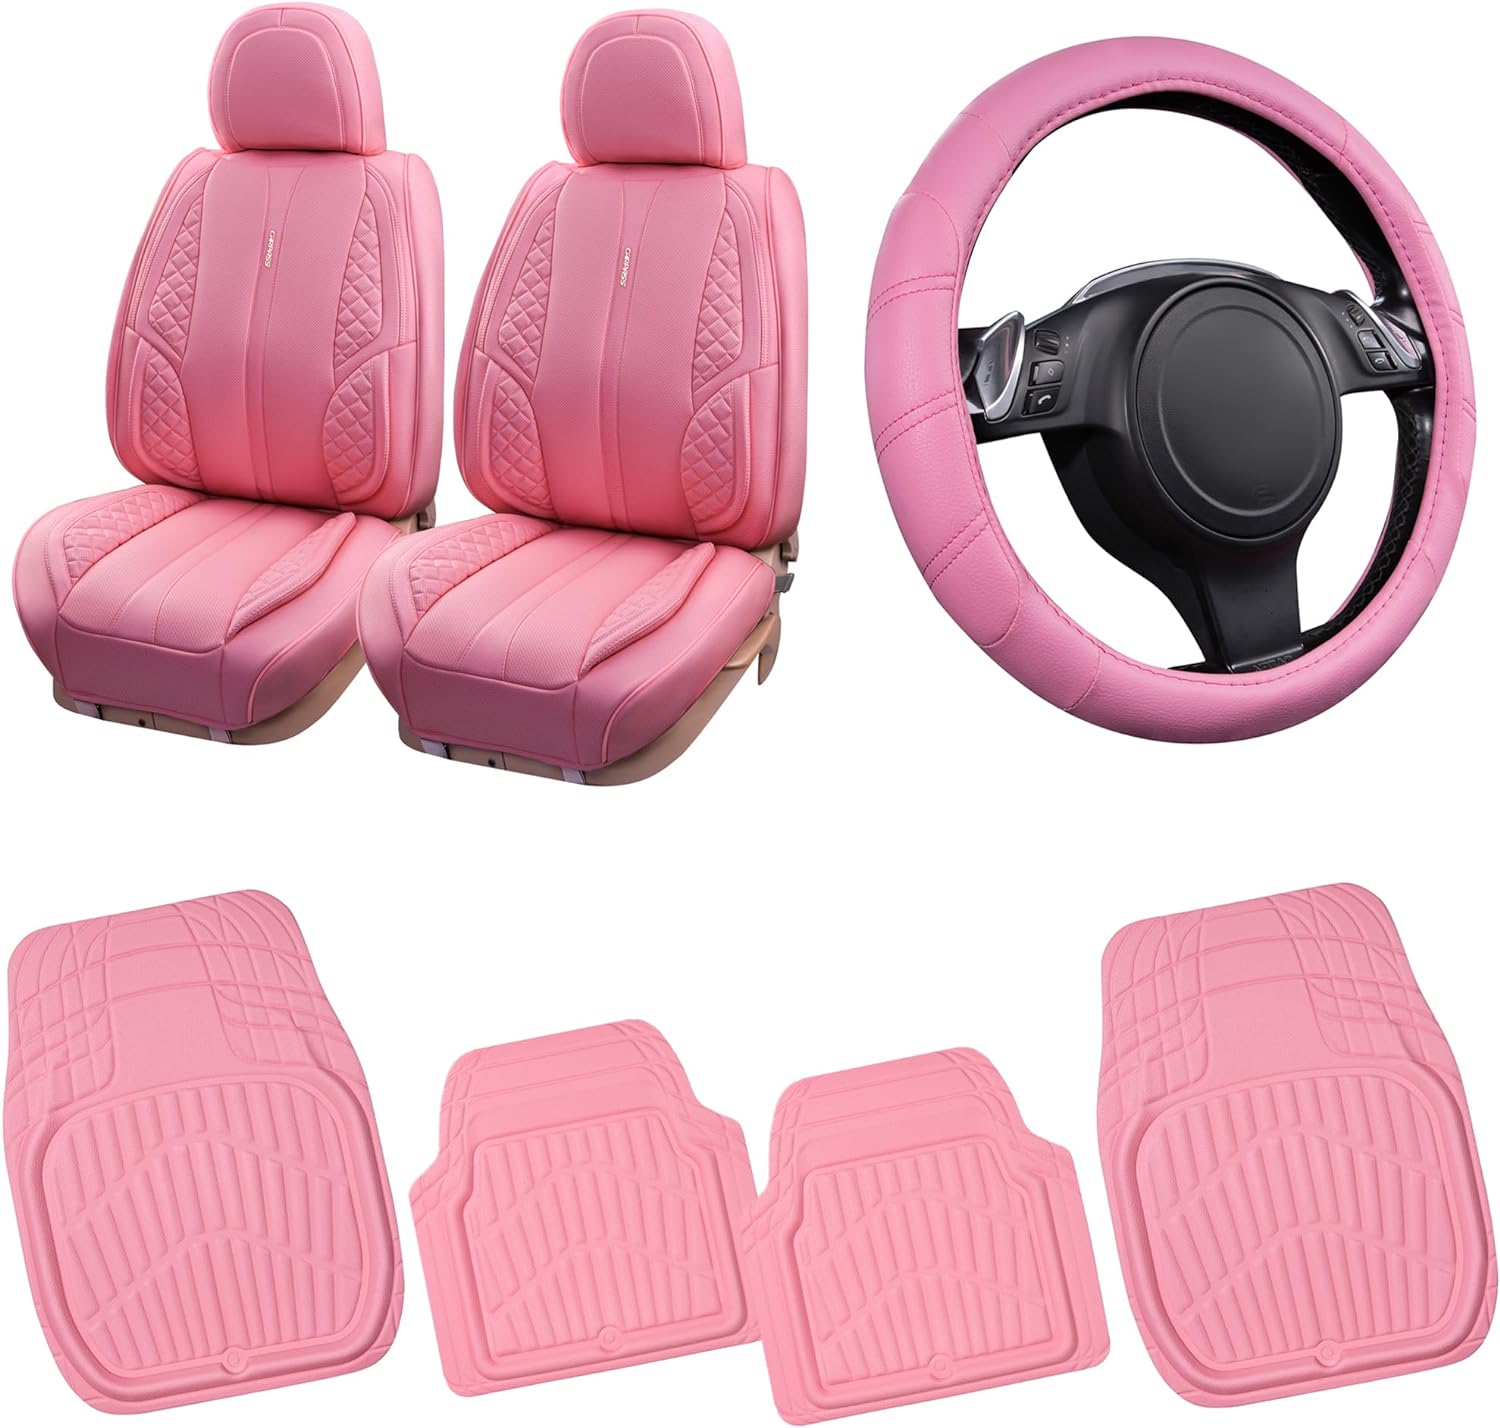 CAR PASS Barbie Pink Nappa Waterproof Leather Car Seat Covers Two Front Seat Bundle with Floor mats and Steering Wheel Cover